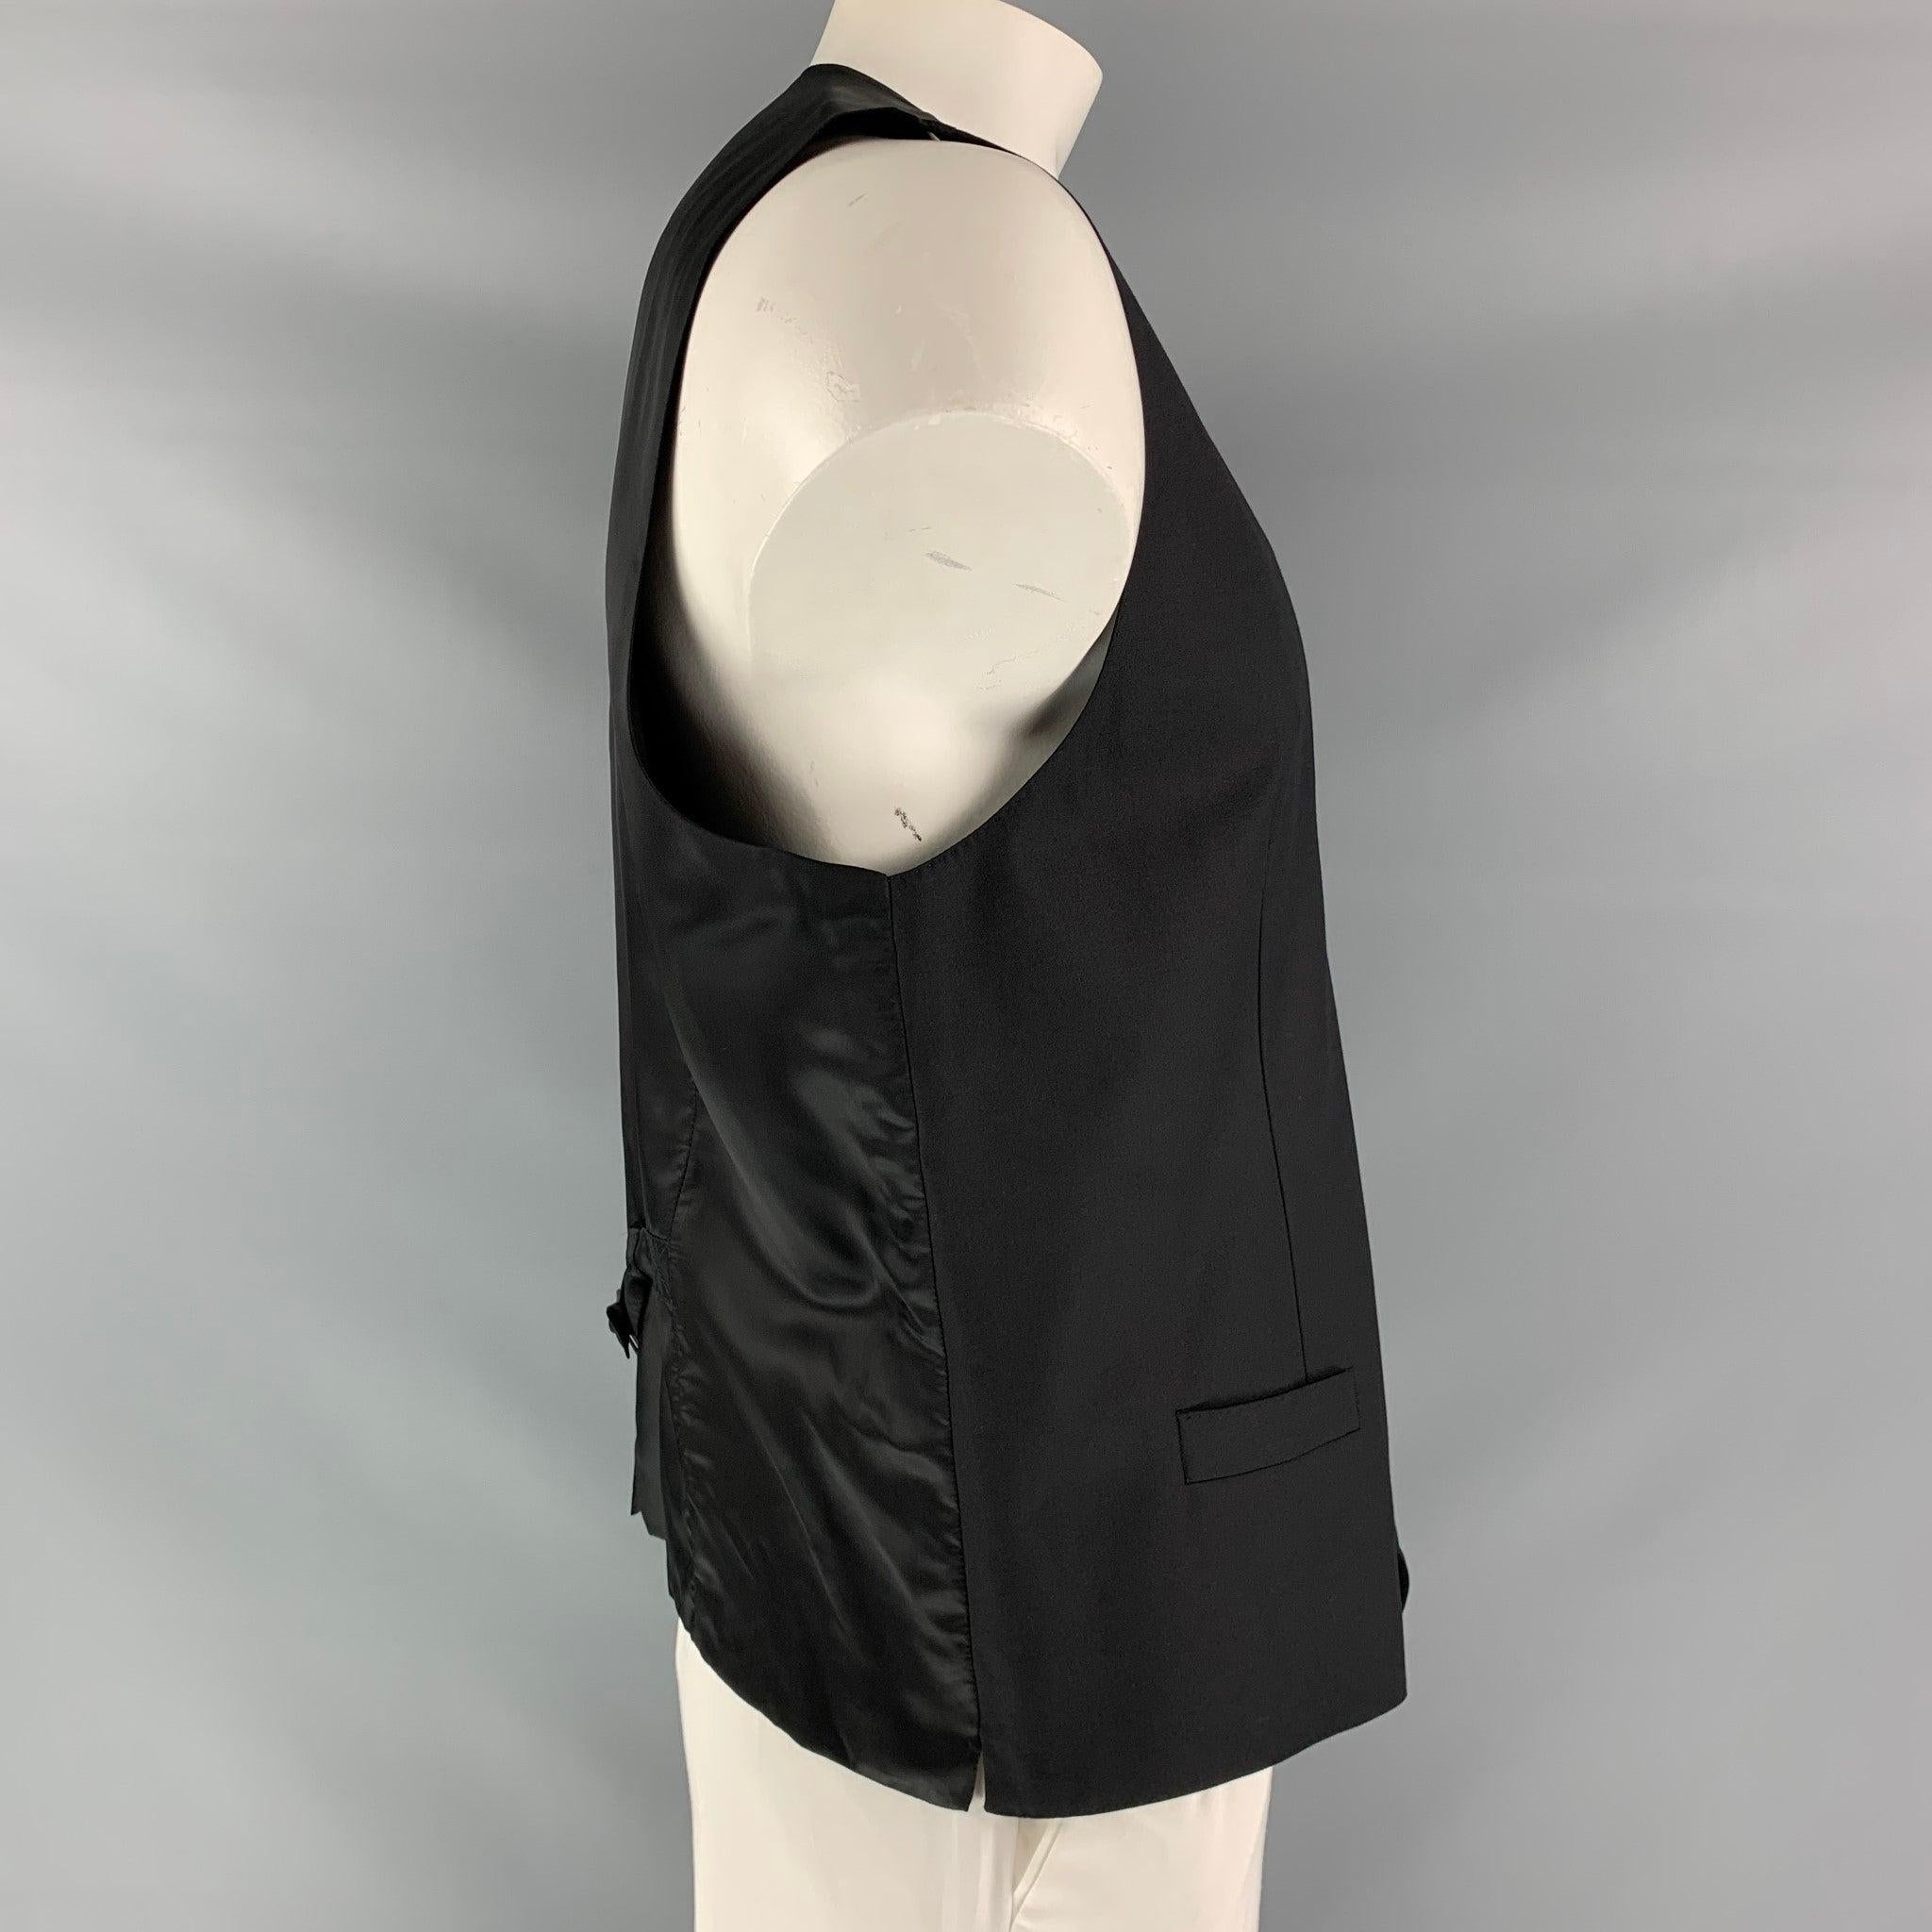 DOLCE & GABBANA dress vest comes in a black wool fabric, full lined featuring V-neck, welt pockets, five buttons down closure, black viscose fabric back and adjustable belt. Made in Italy.Excellent Pre-Owned Condition.  

Marked:   no size marked